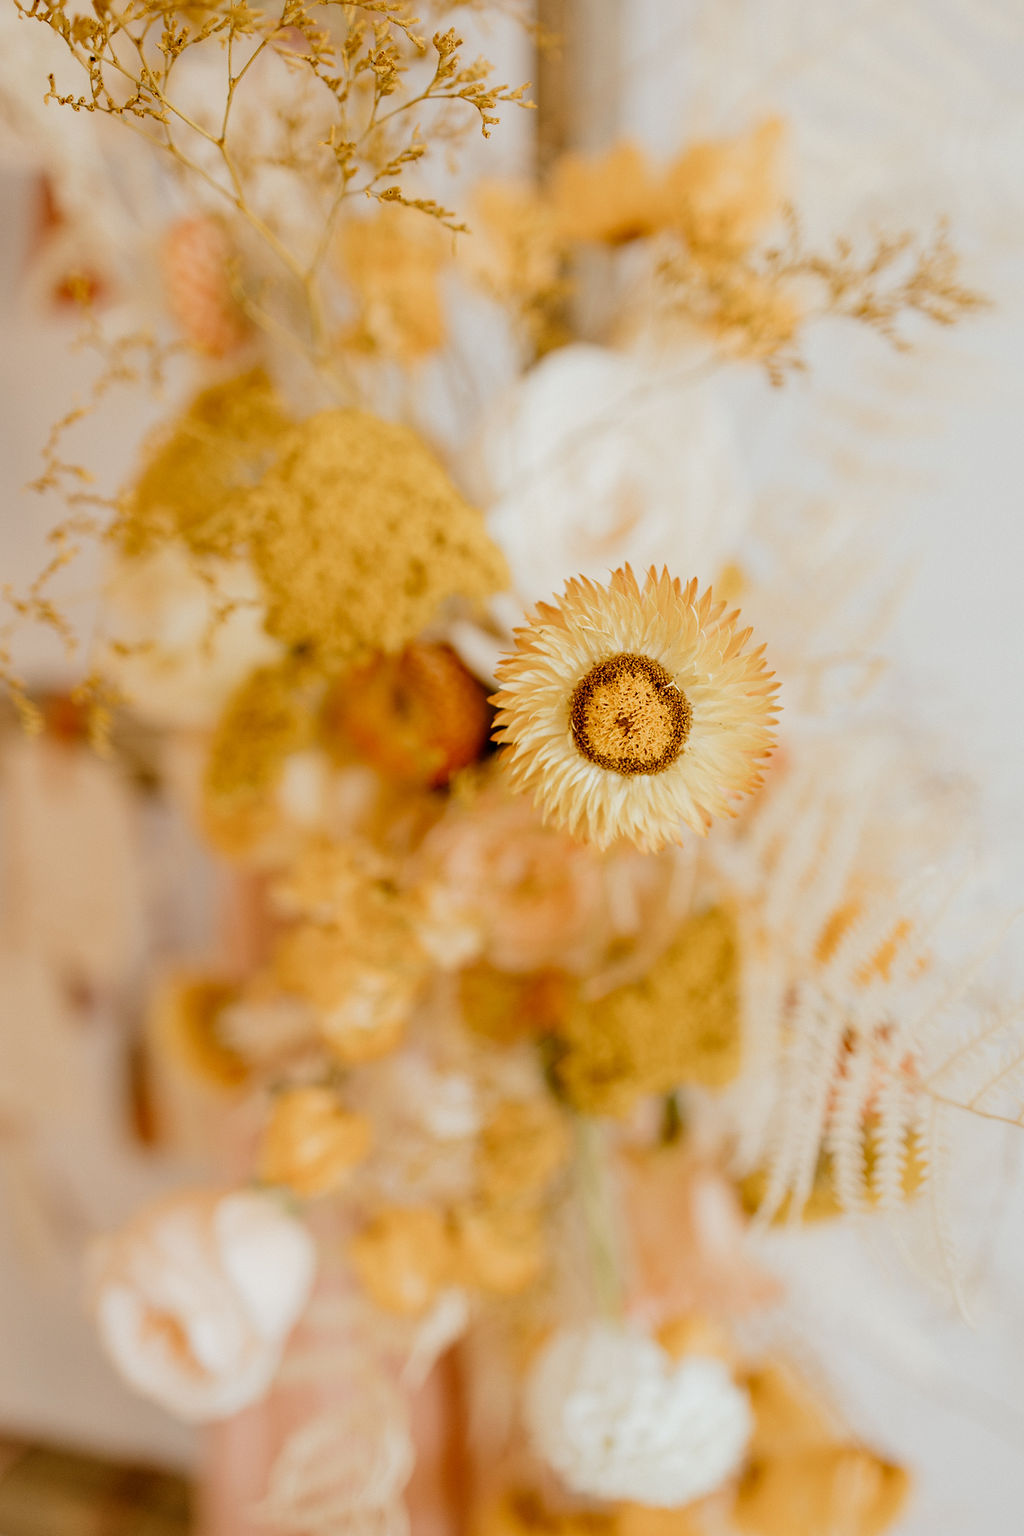 Dried autumn florals in yellow, peach, cream and white hues